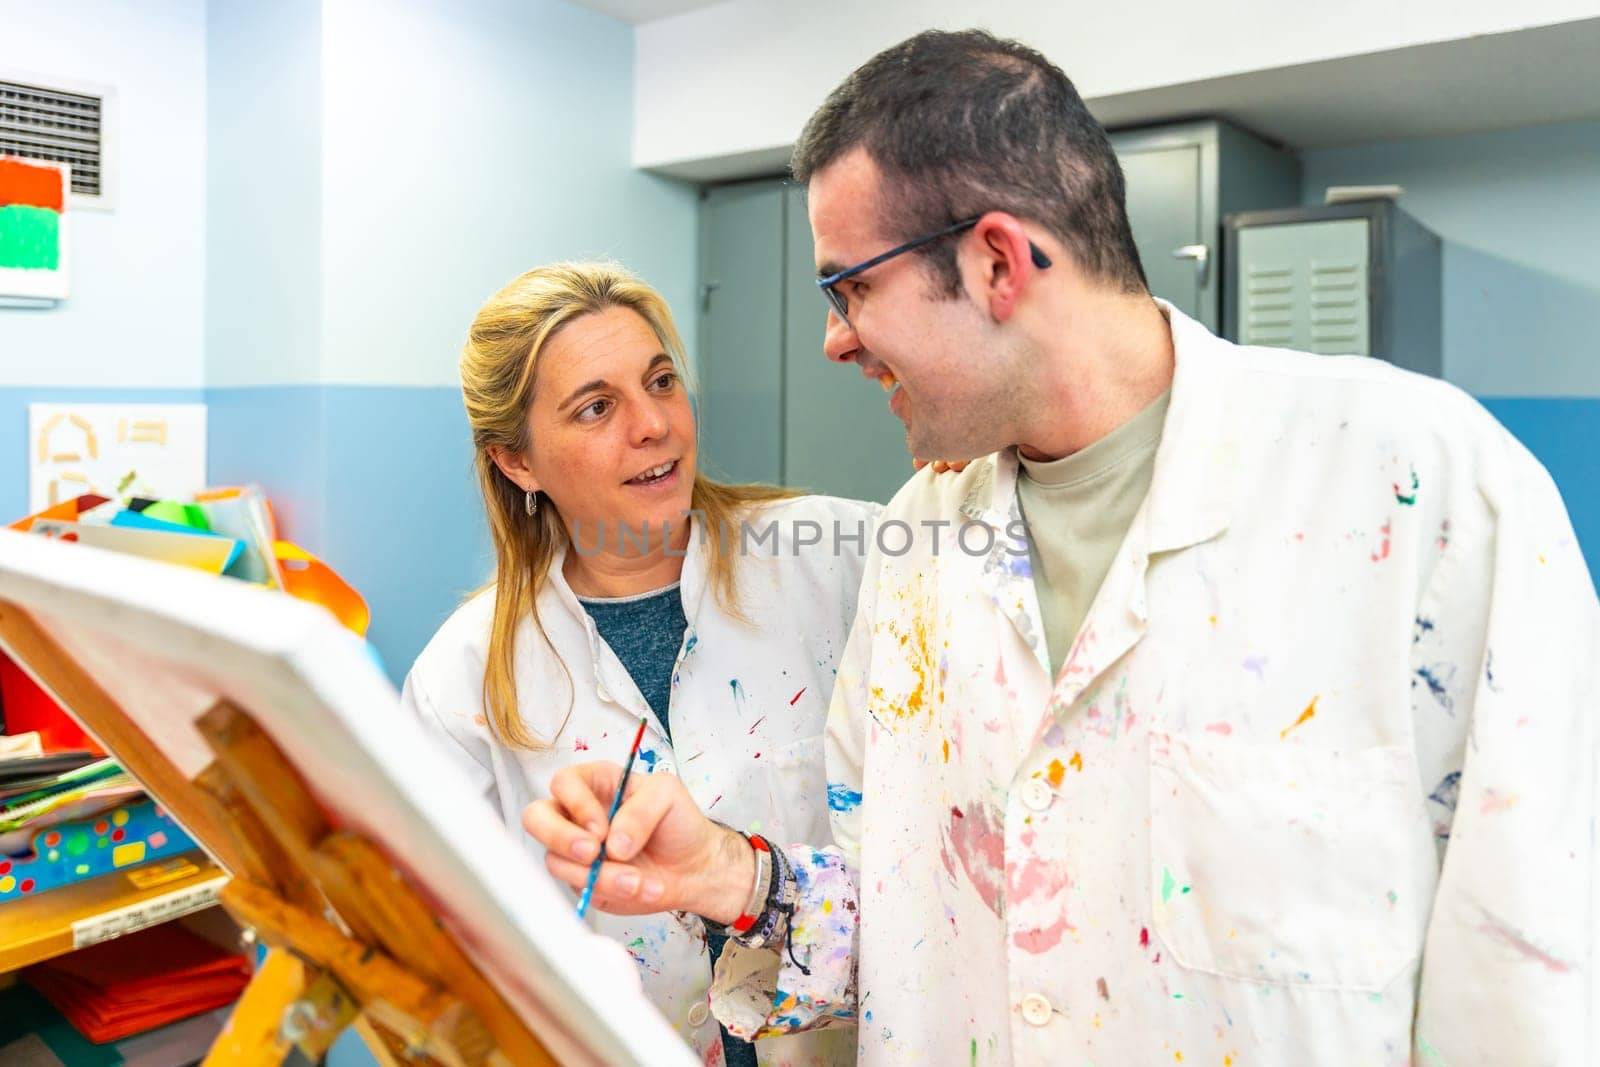 Teacher of a painting class talking to a disabled student in a center of people with special needs